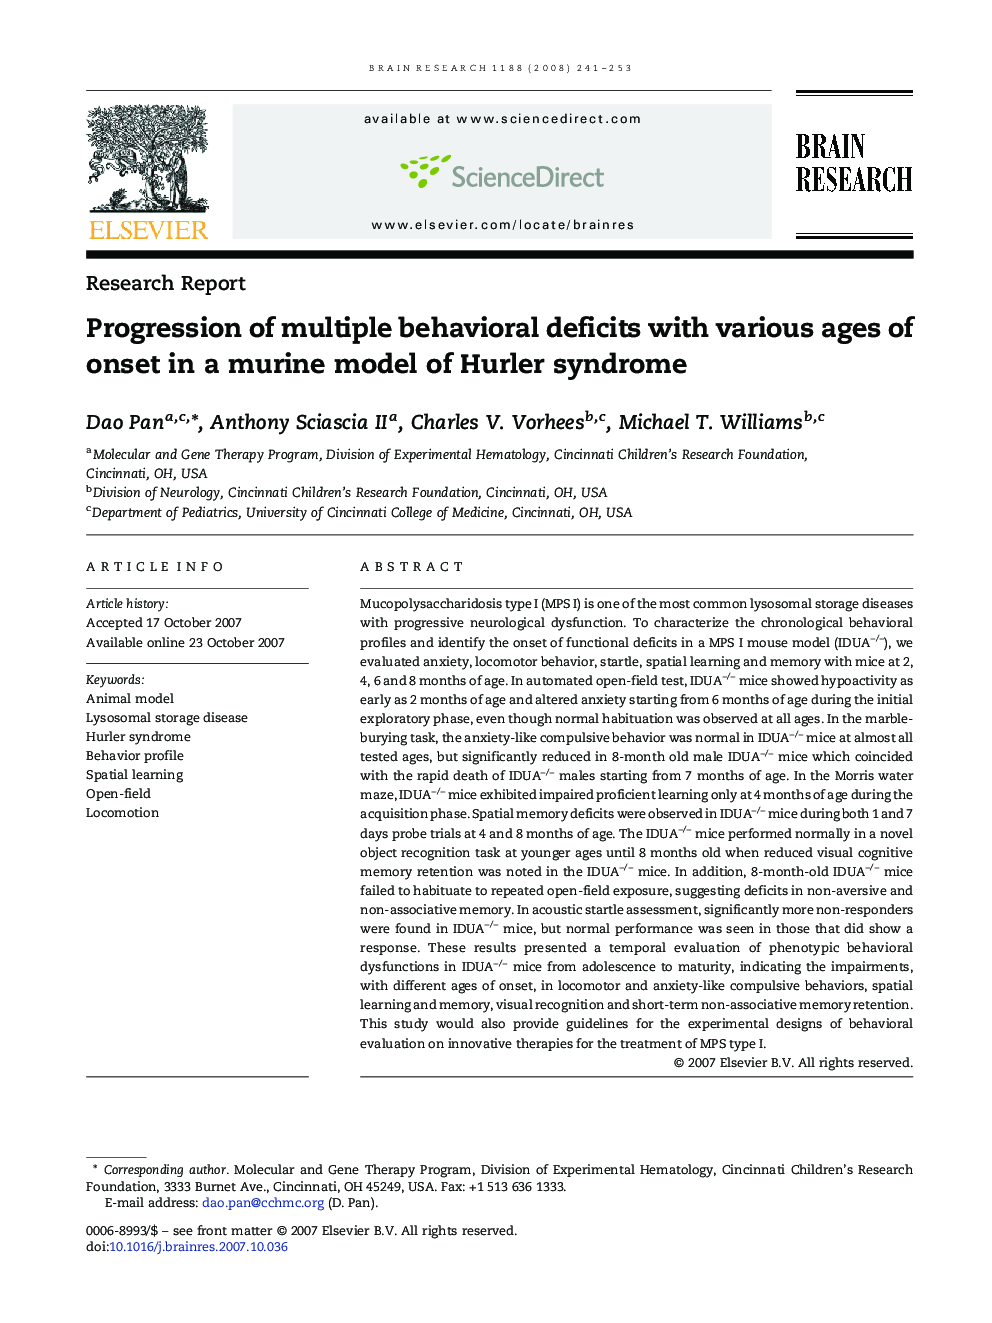 Progression of multiple behavioral deficits with various ages of onset in a murine model of Hurler syndrome